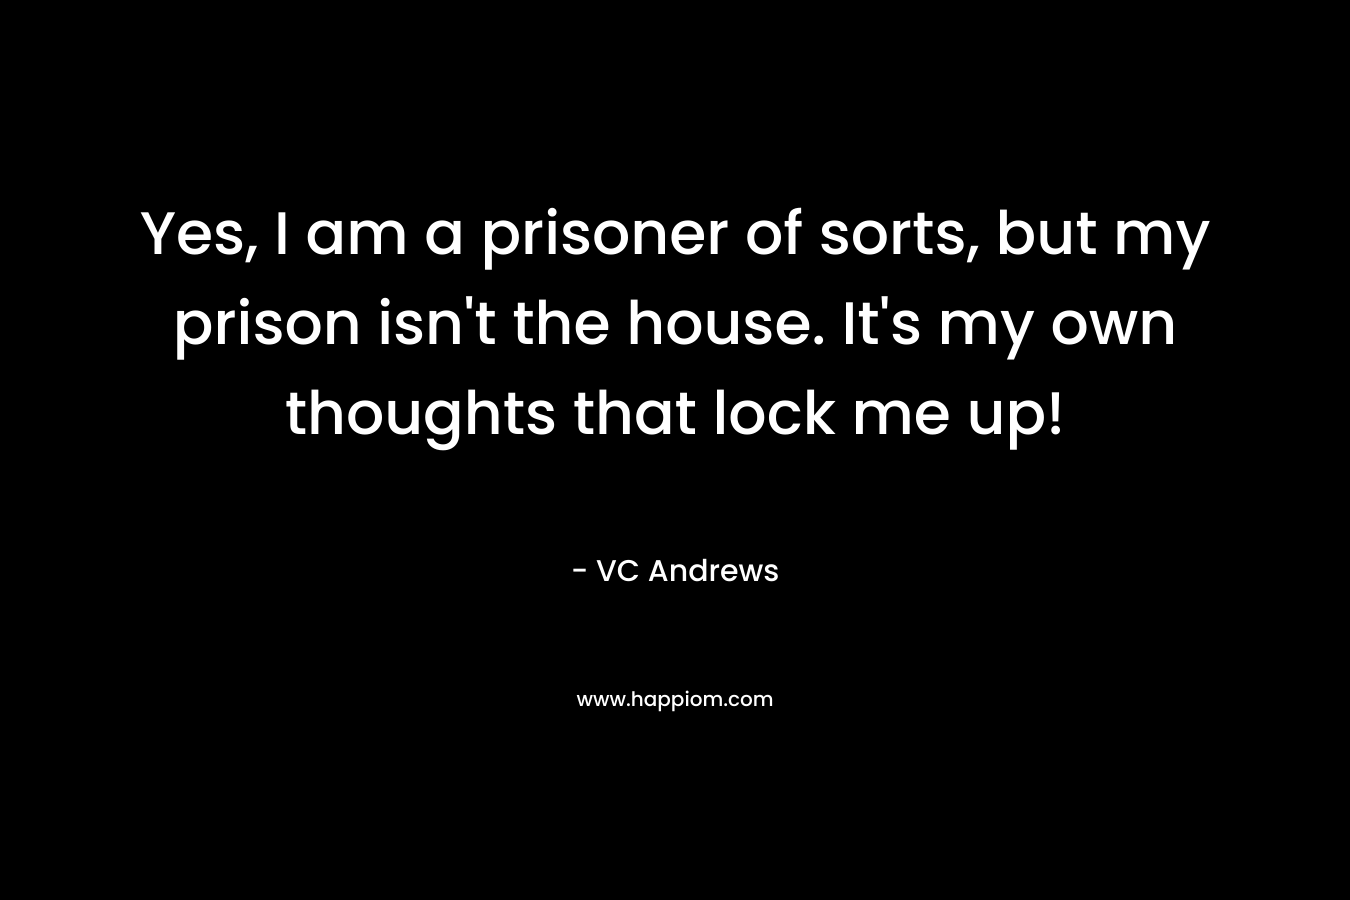 Yes, I am a prisoner of sorts, but my prison isn’t the house. It’s my own thoughts that lock me up! – VC Andrews